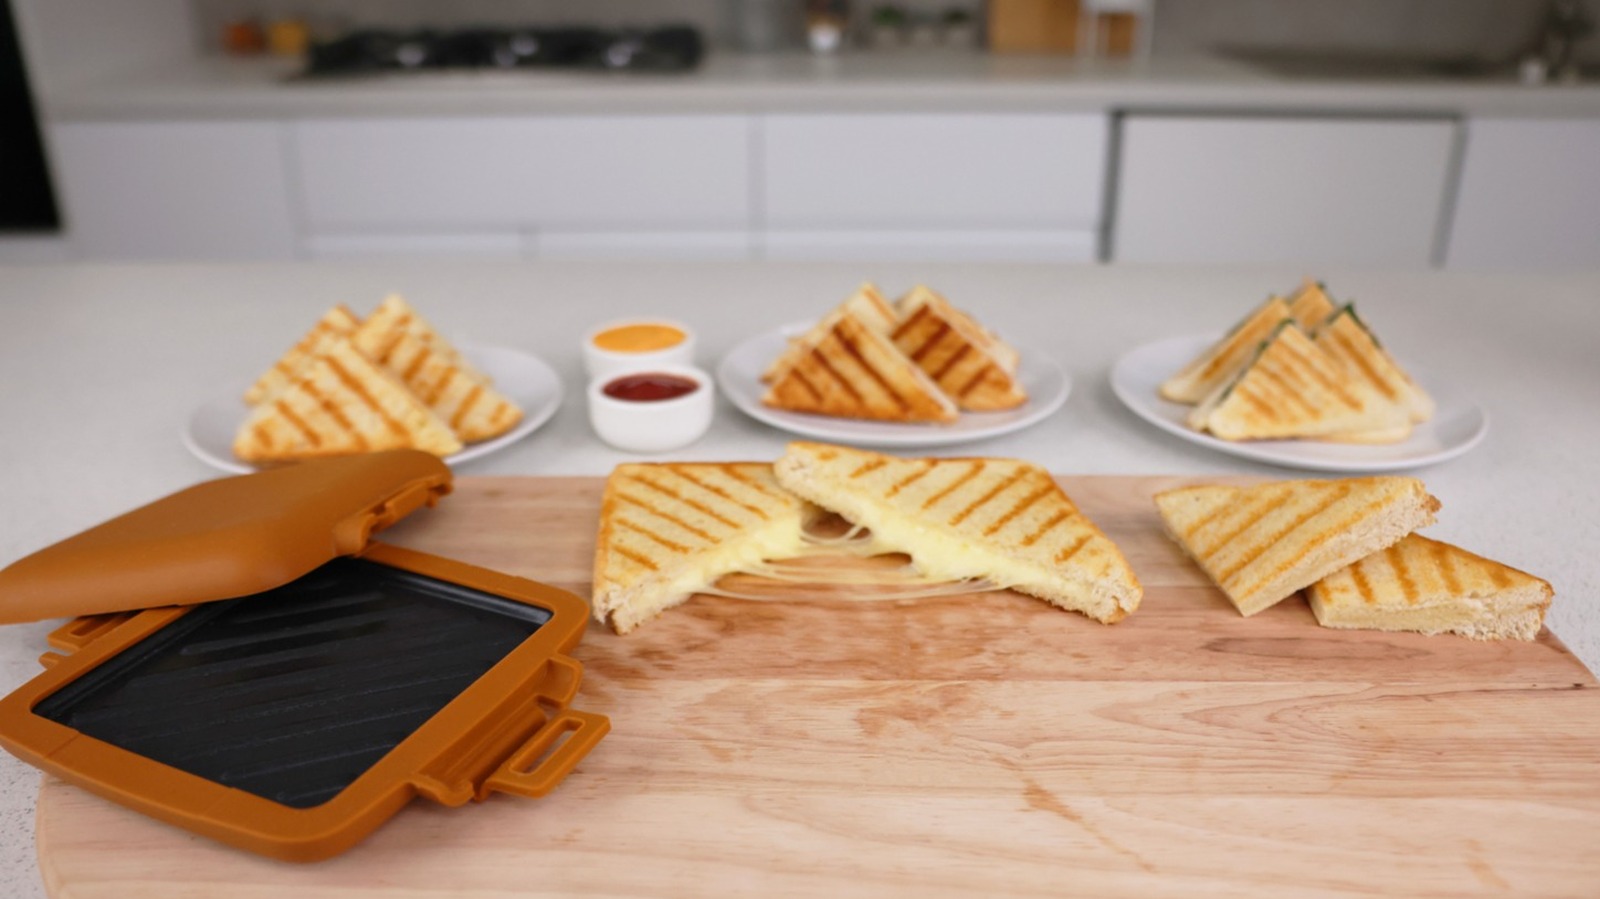 https://www.mashed.com/img/gallery/what-exactly-is-the-viral-micro-munchy-toasted-sandwich-maker/l-intro-1696011522.jpg